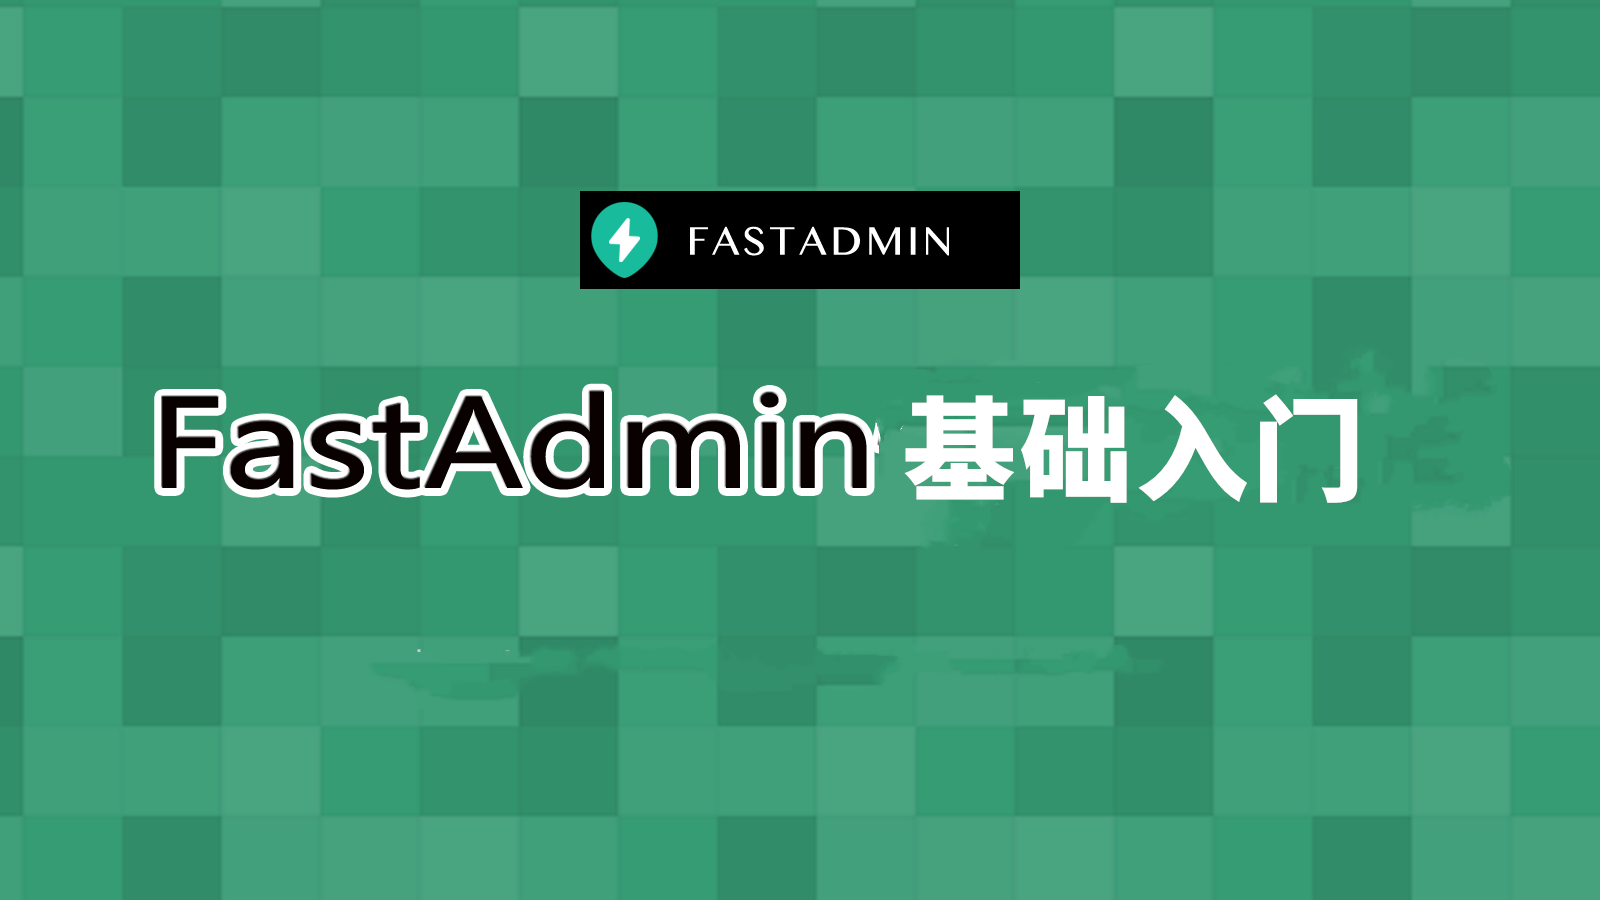  Getting Started with FastAdmin